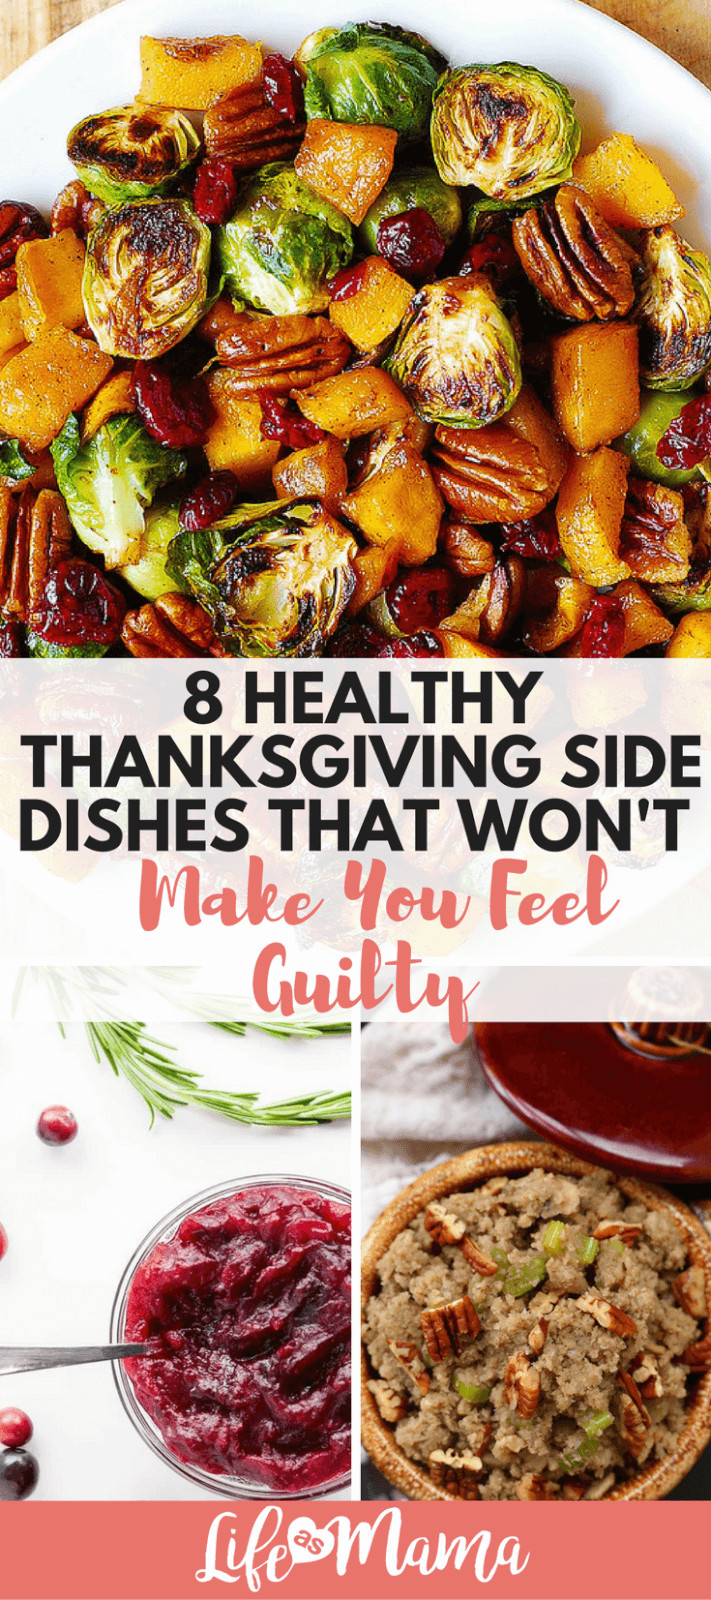 Healthy Side Dishes For Thanksgiving
 8 Healthy Thanksgiving Side Dishes That Won t Make You